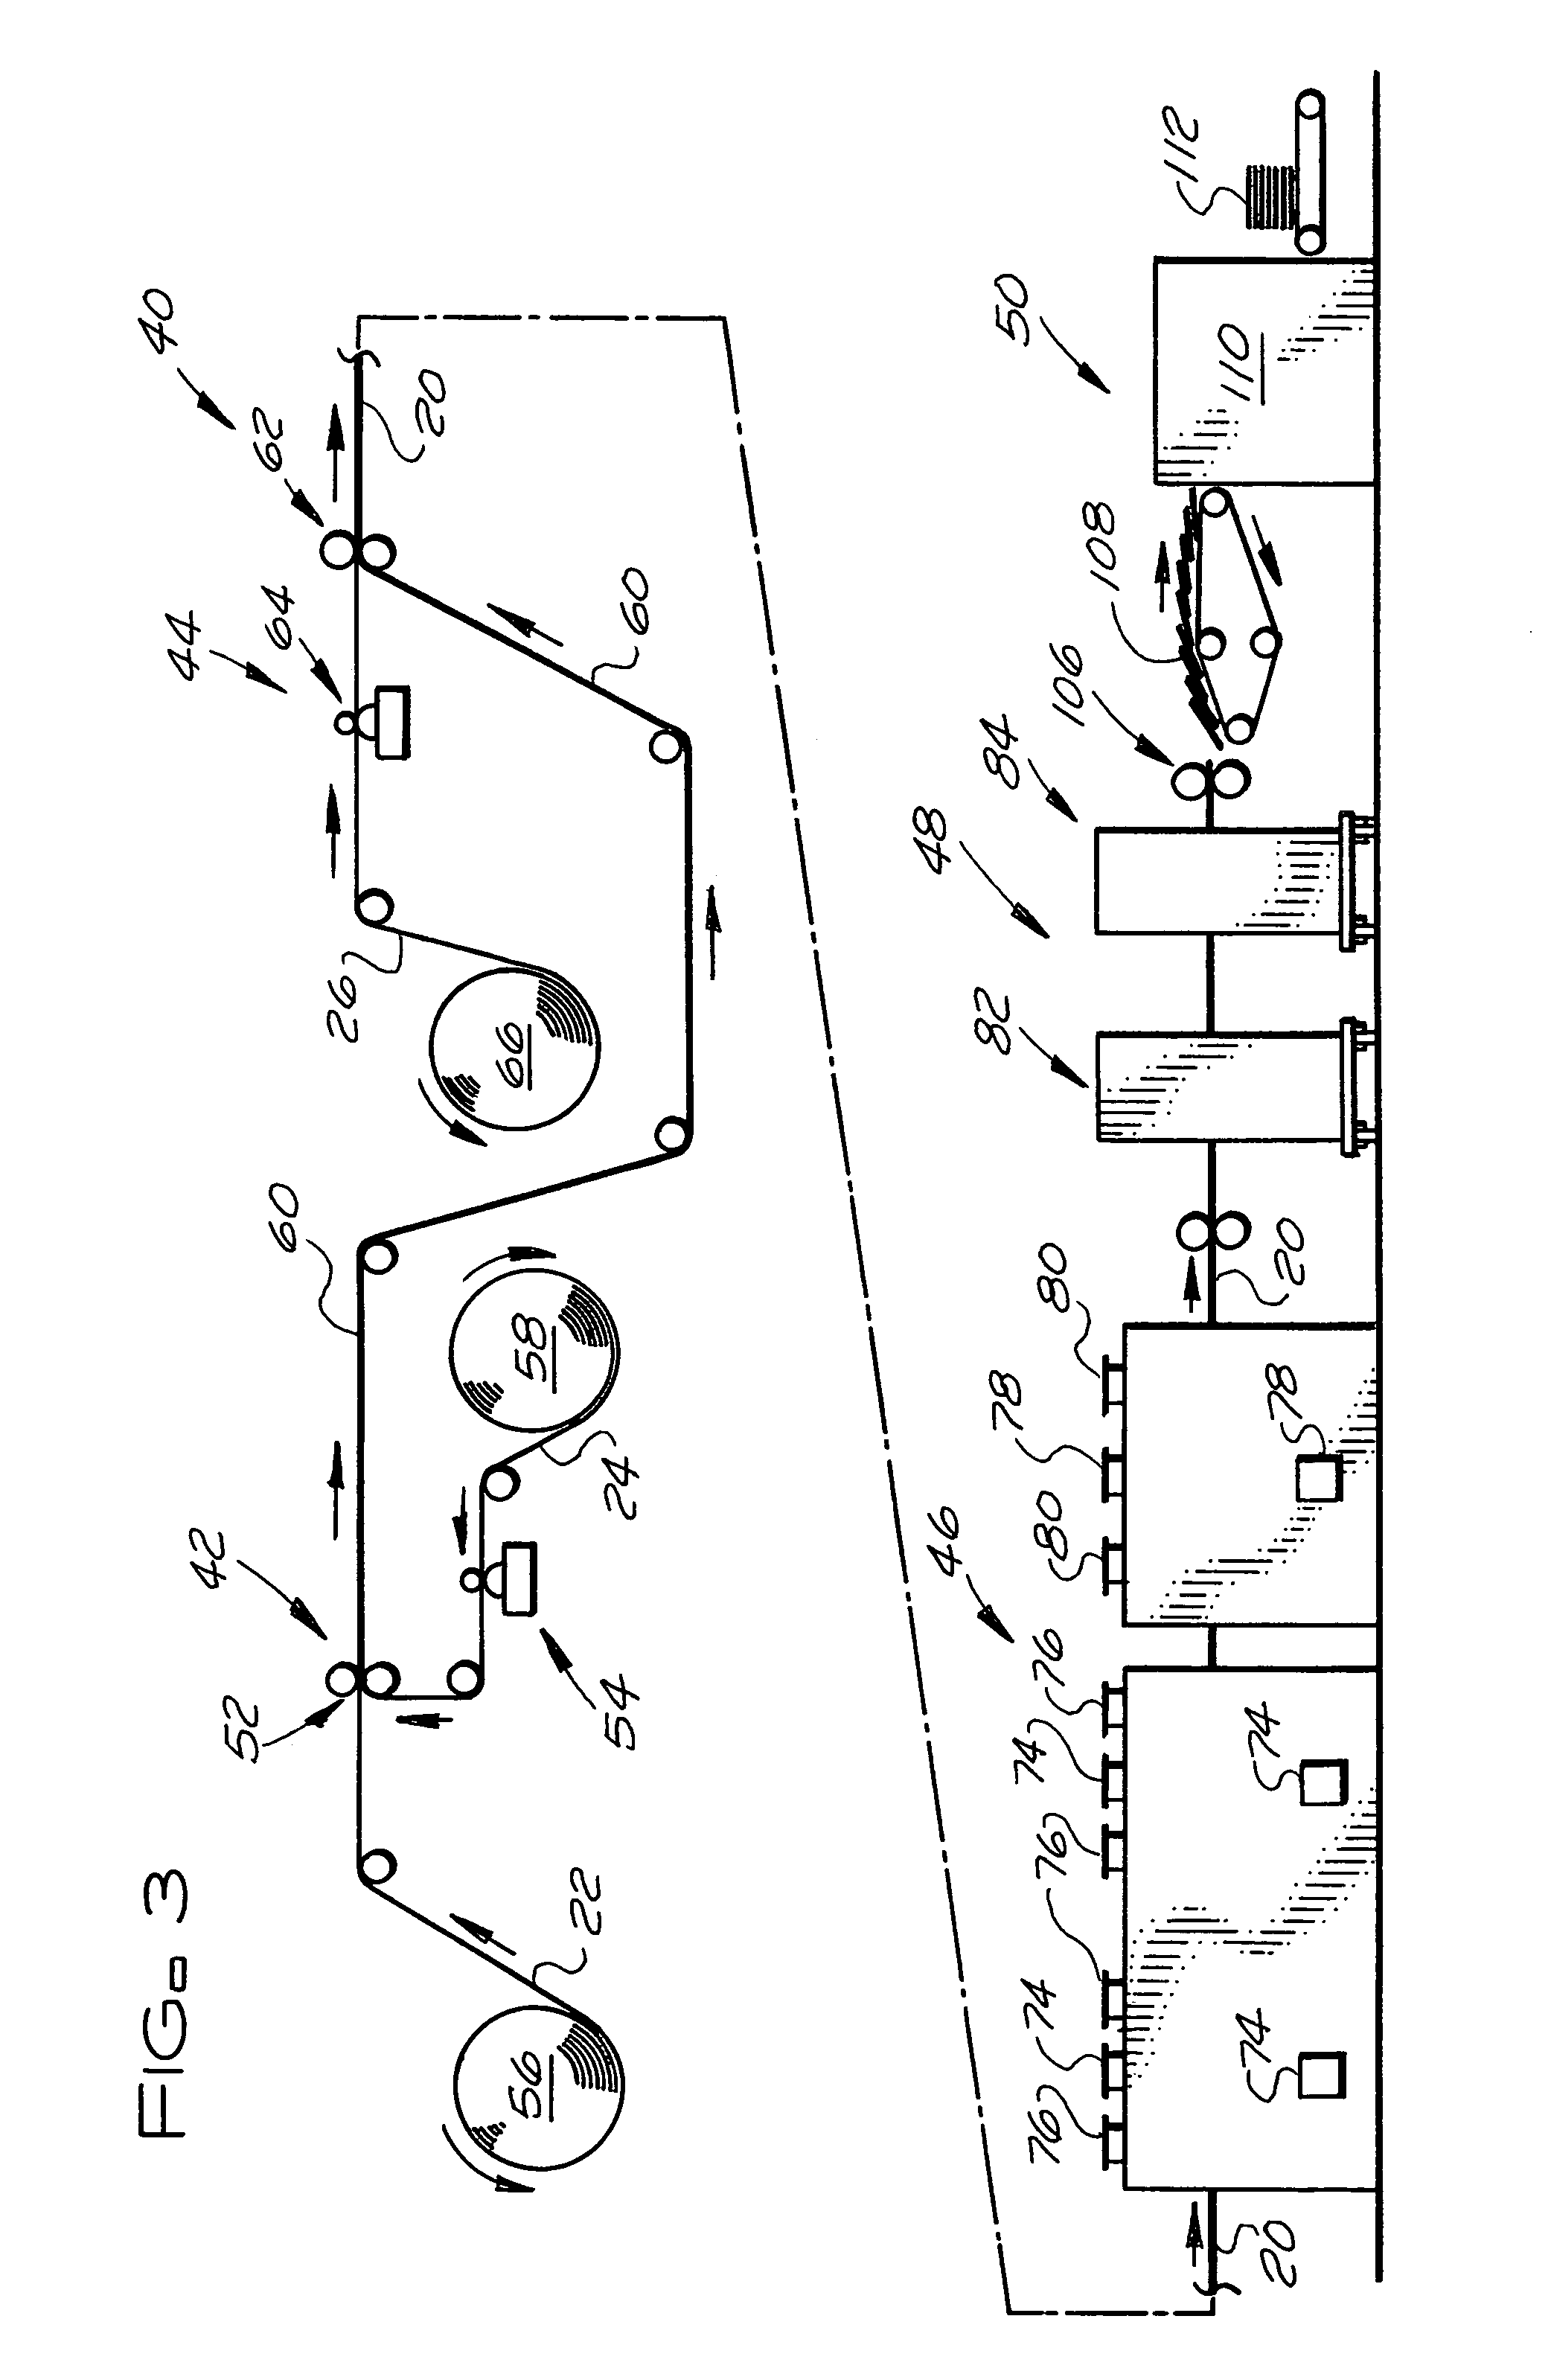 Method and apparatus for forming corrugated board carton blanks